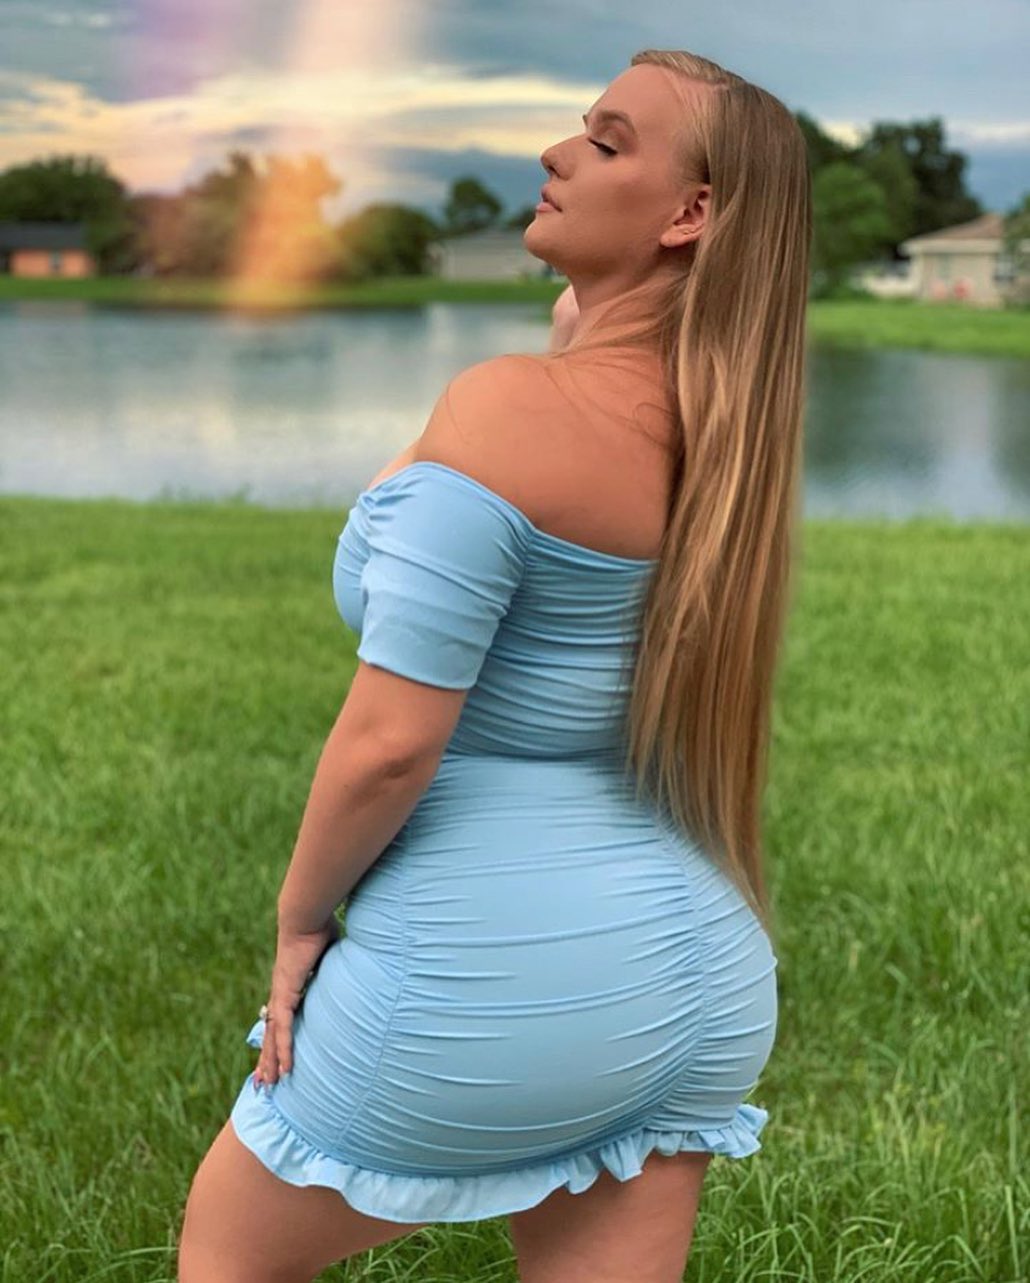 Epitome of a premium Pawg